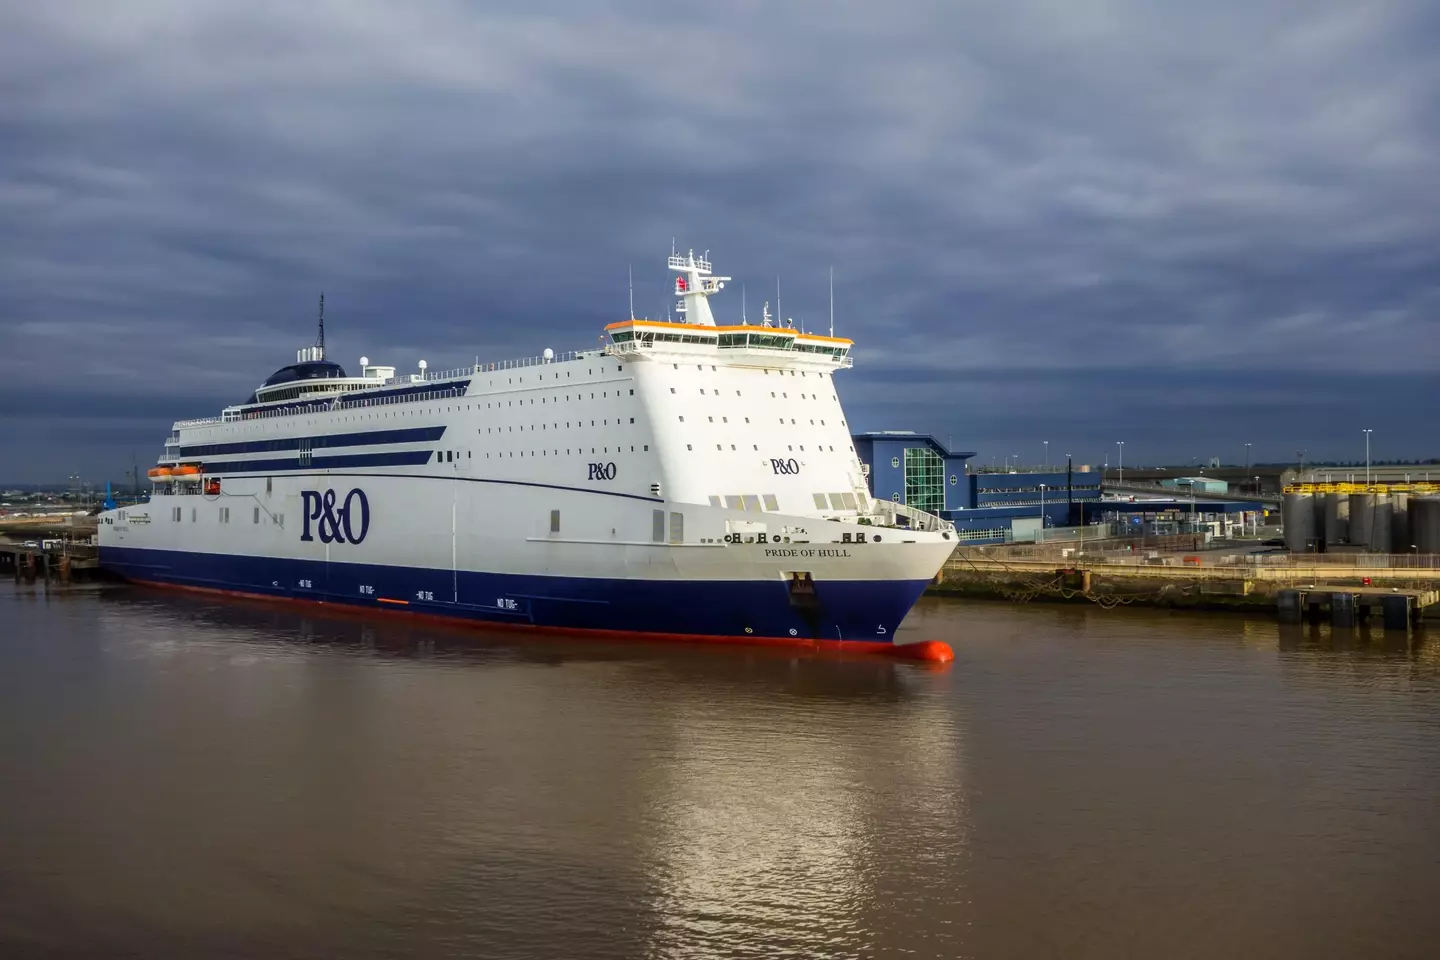 800 employees were laid off today by P&O.